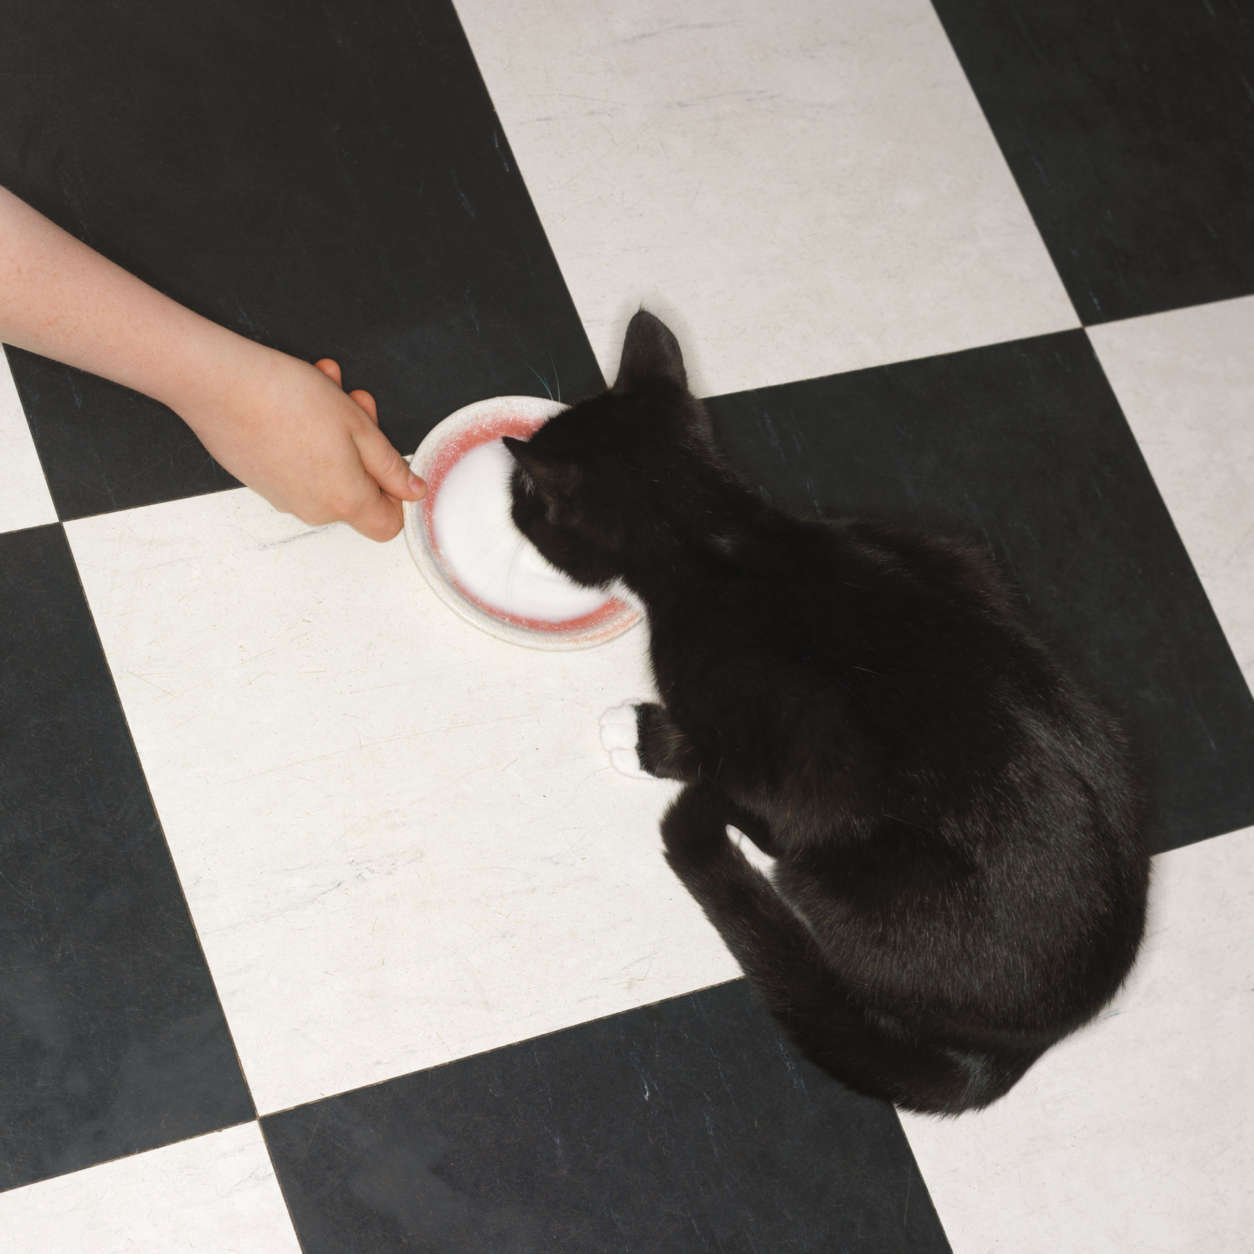 elevated close up view of a hand giving a bowl of milk to a cat